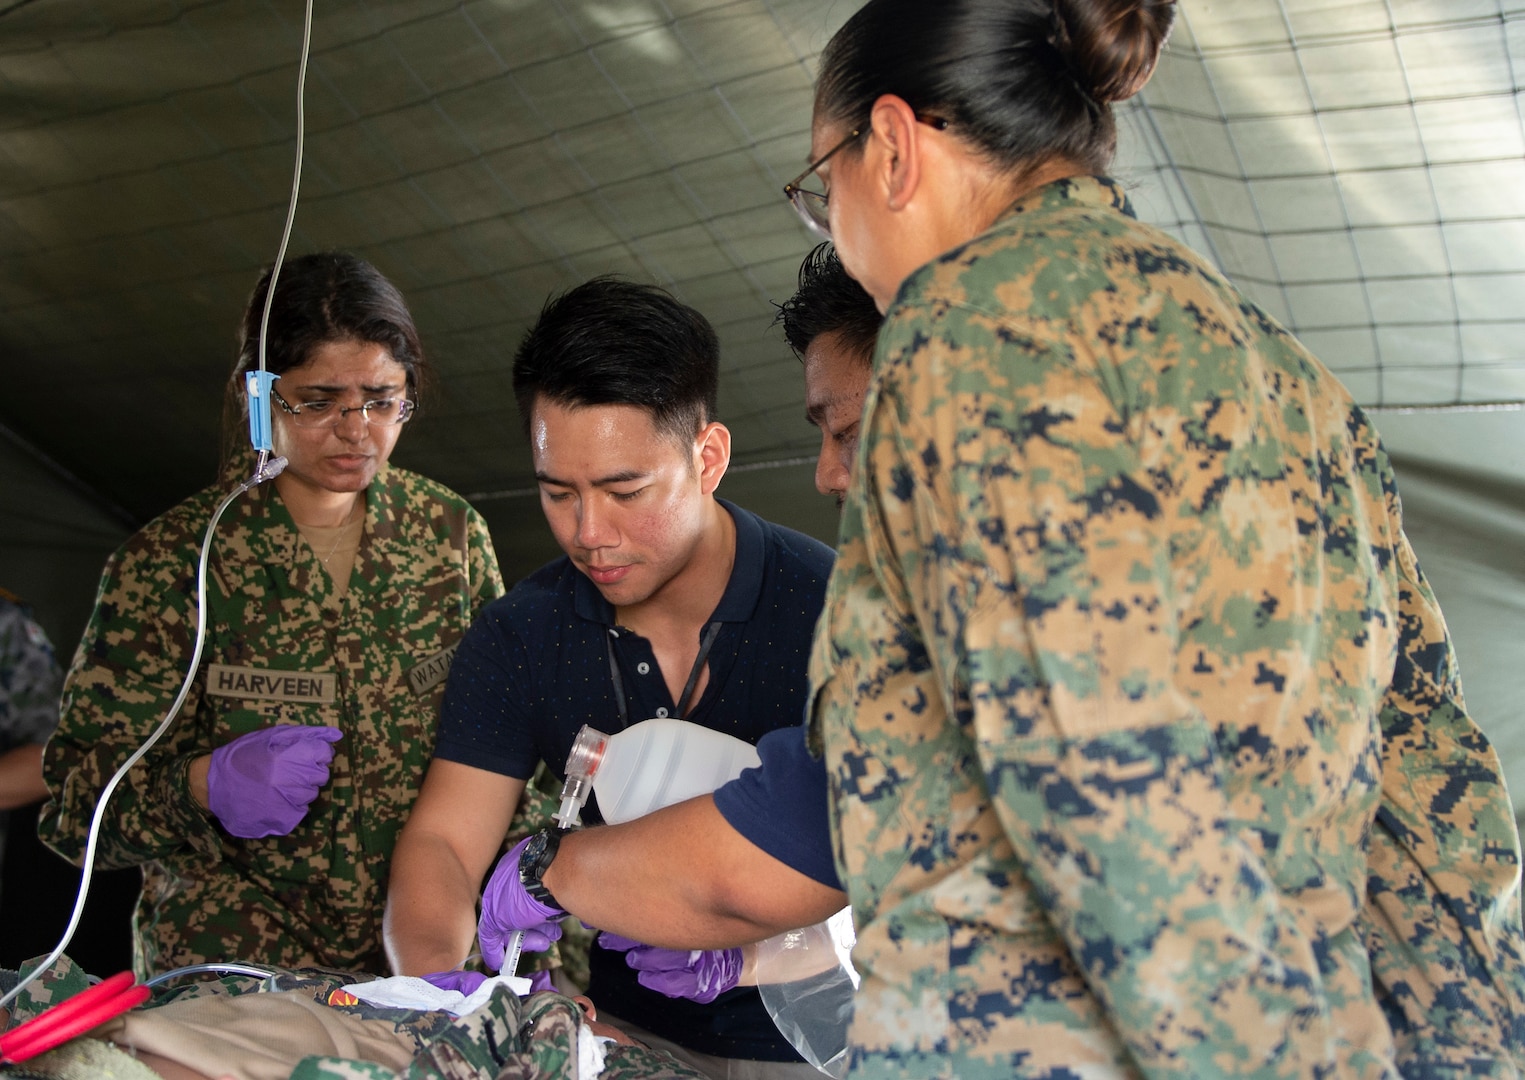 Malaysian Armed Forces Host Medical Evacuation Exercise During PP19